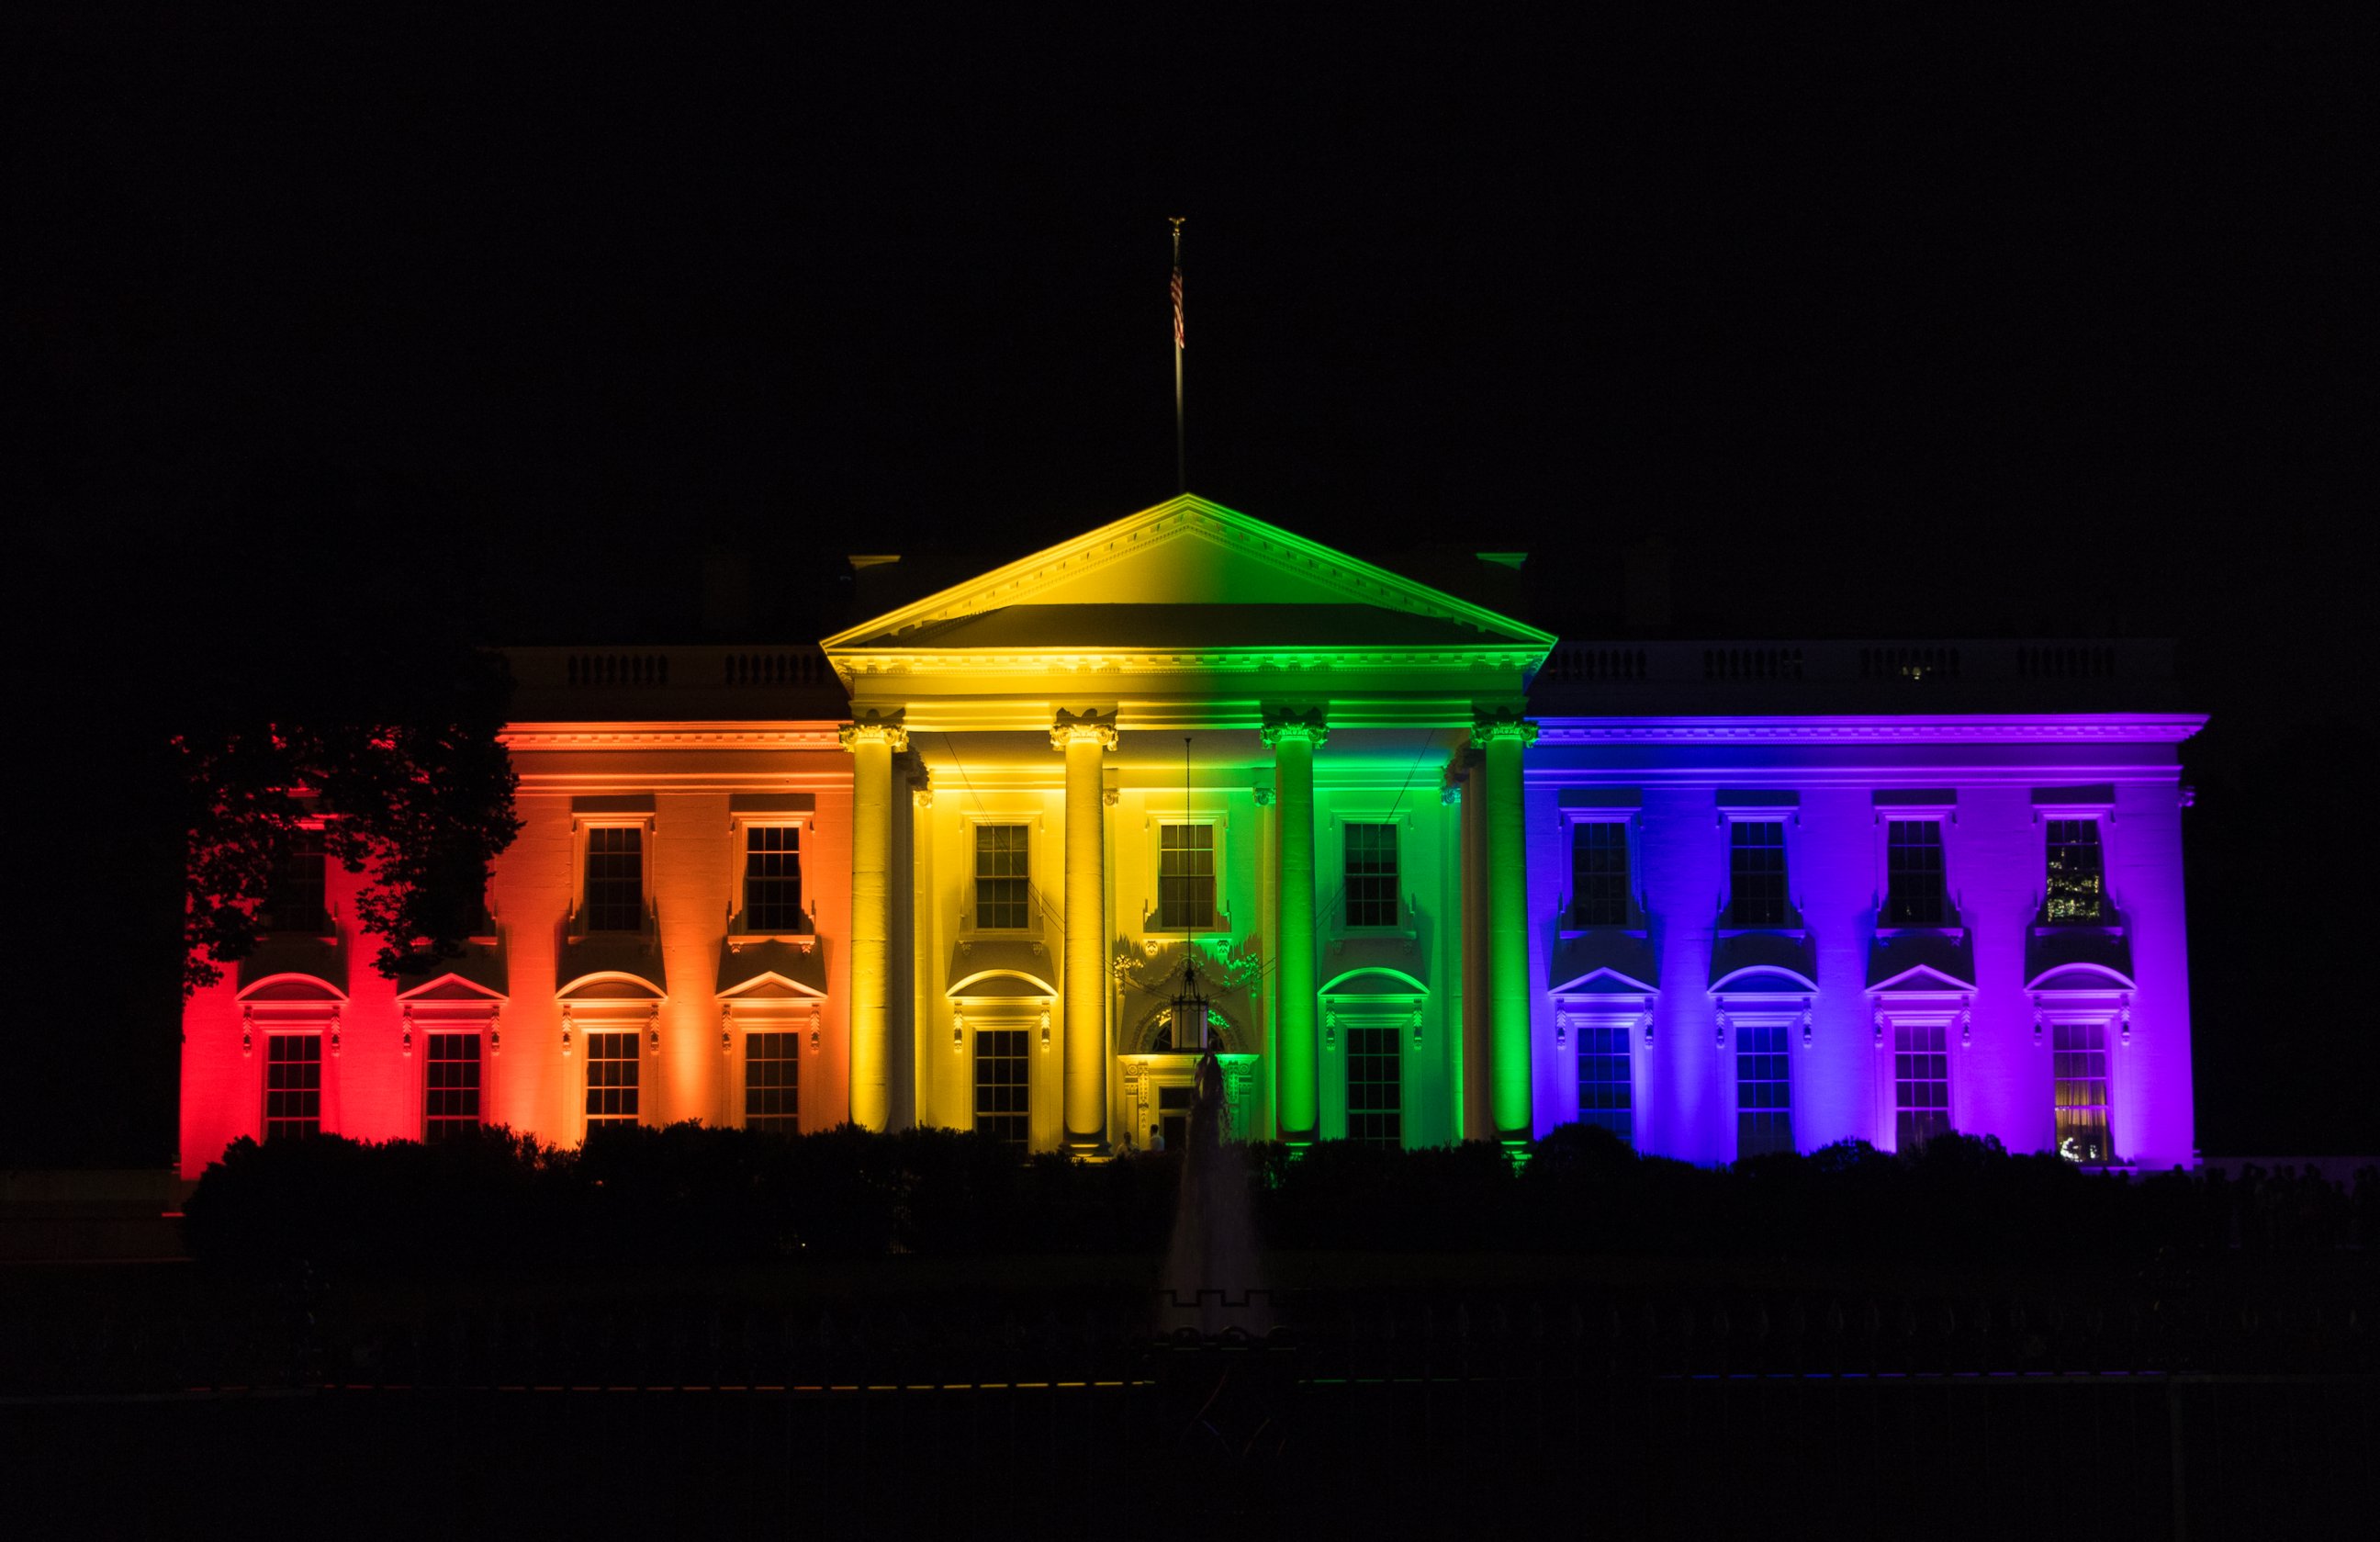 PHOTO: In this June 26, 2015 file photo, the front of the White House is lit in the color of the rainbow after the United States Supreme Court issued the decision in the case of Obergefell v. Hodges ruling that same-sex marriage is legal in all states. 